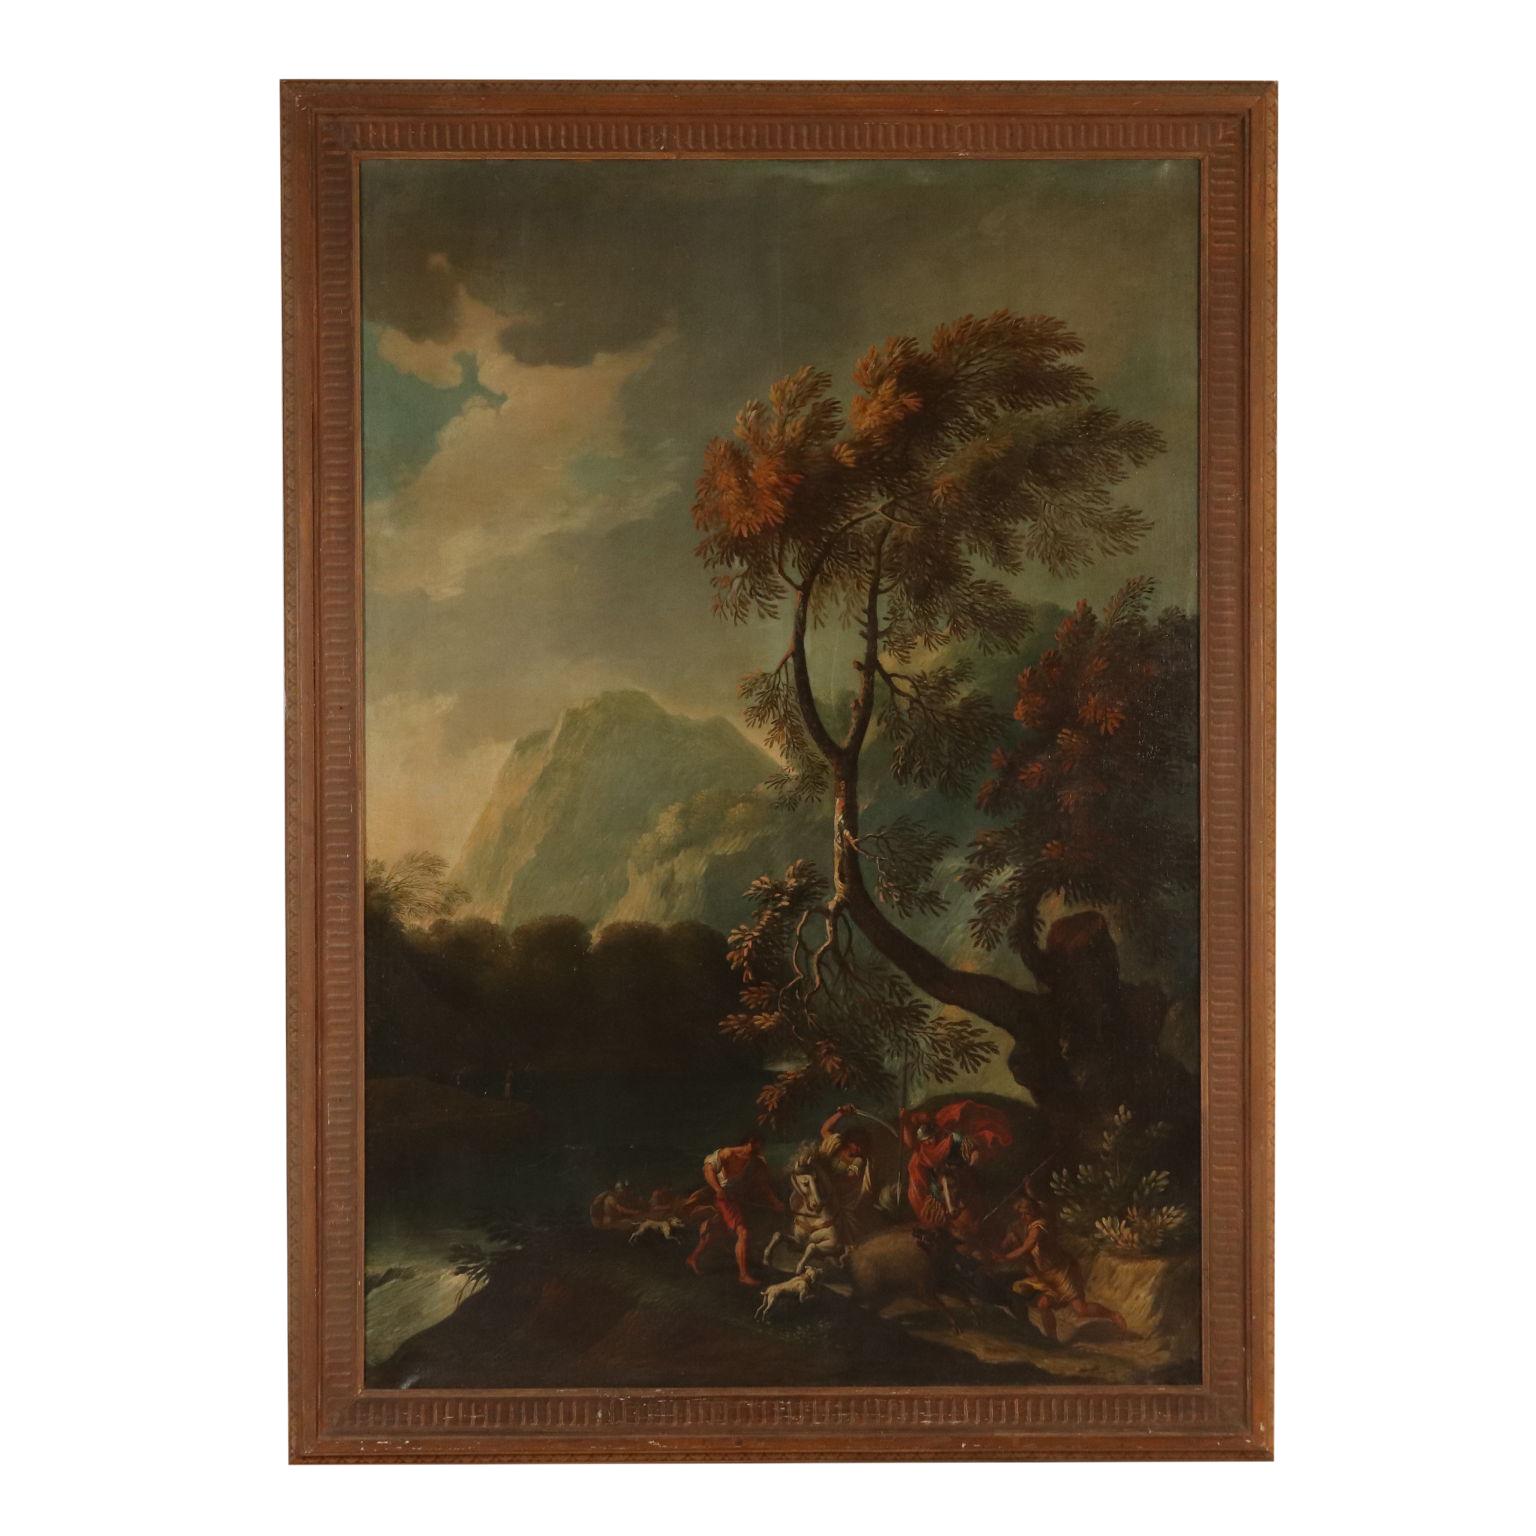 Unknown Landscape Painting - Large Landscape Wild Boar Hunting Oil on Canvas 18th Century